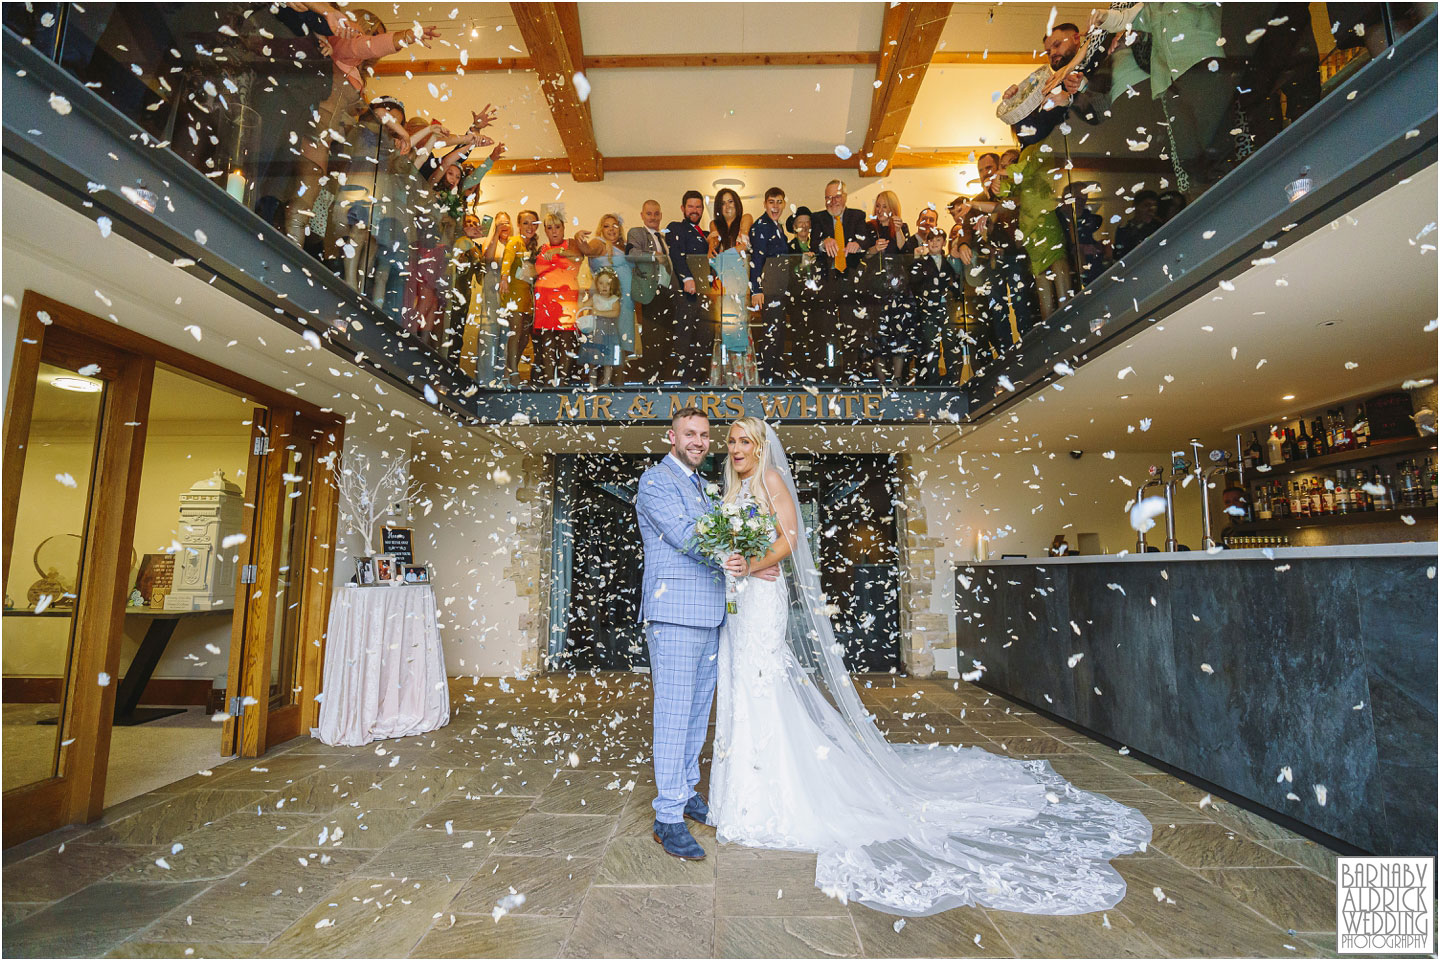 Priory Cottages Wedding Photography, Confetti at Priory Cottages, Priory Barn Yorkshire Wedding Photographer, Priory Cottages Autumn Wedding Photos